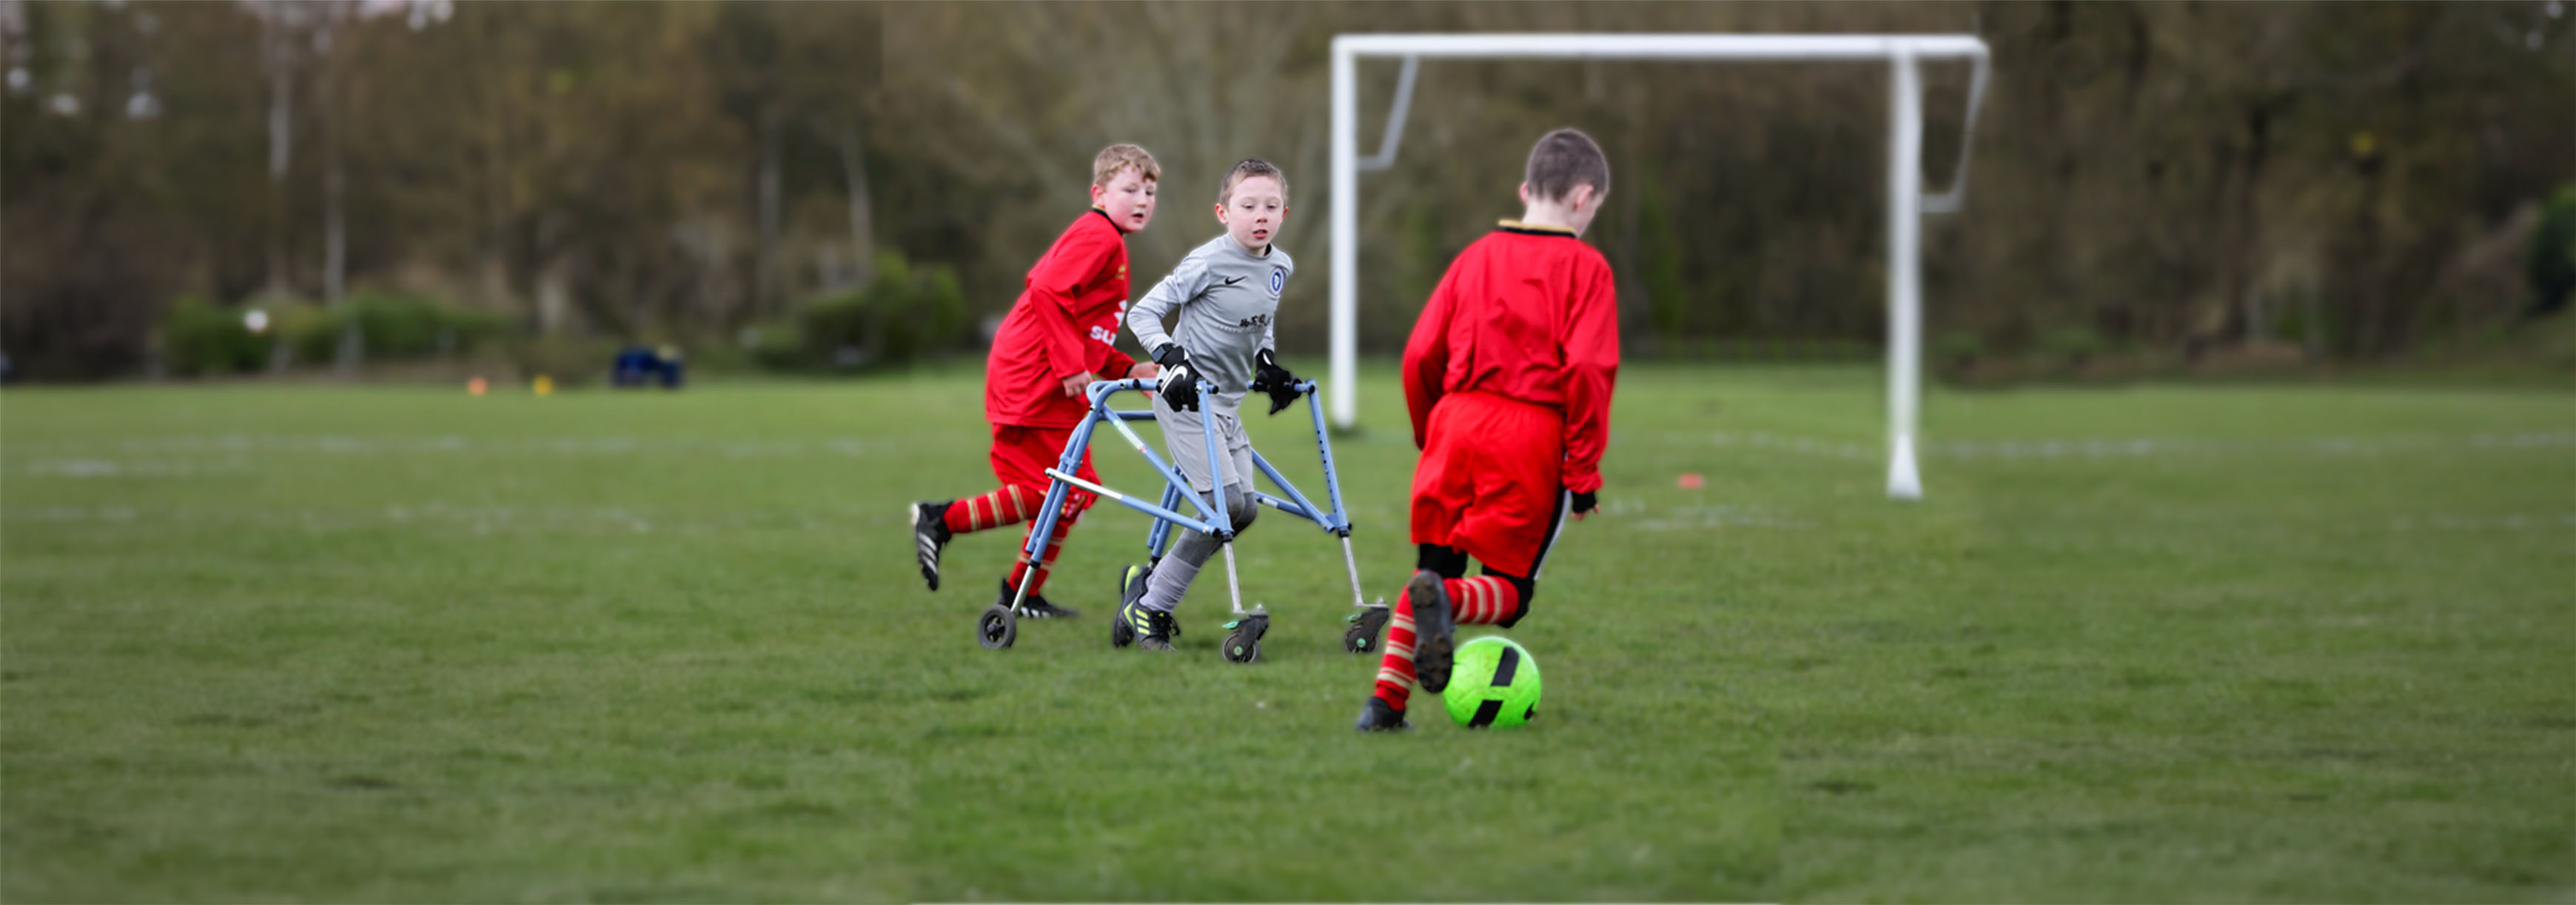 A child who is a frame user plays football on a grass pitch with two kids who aren't frame users.